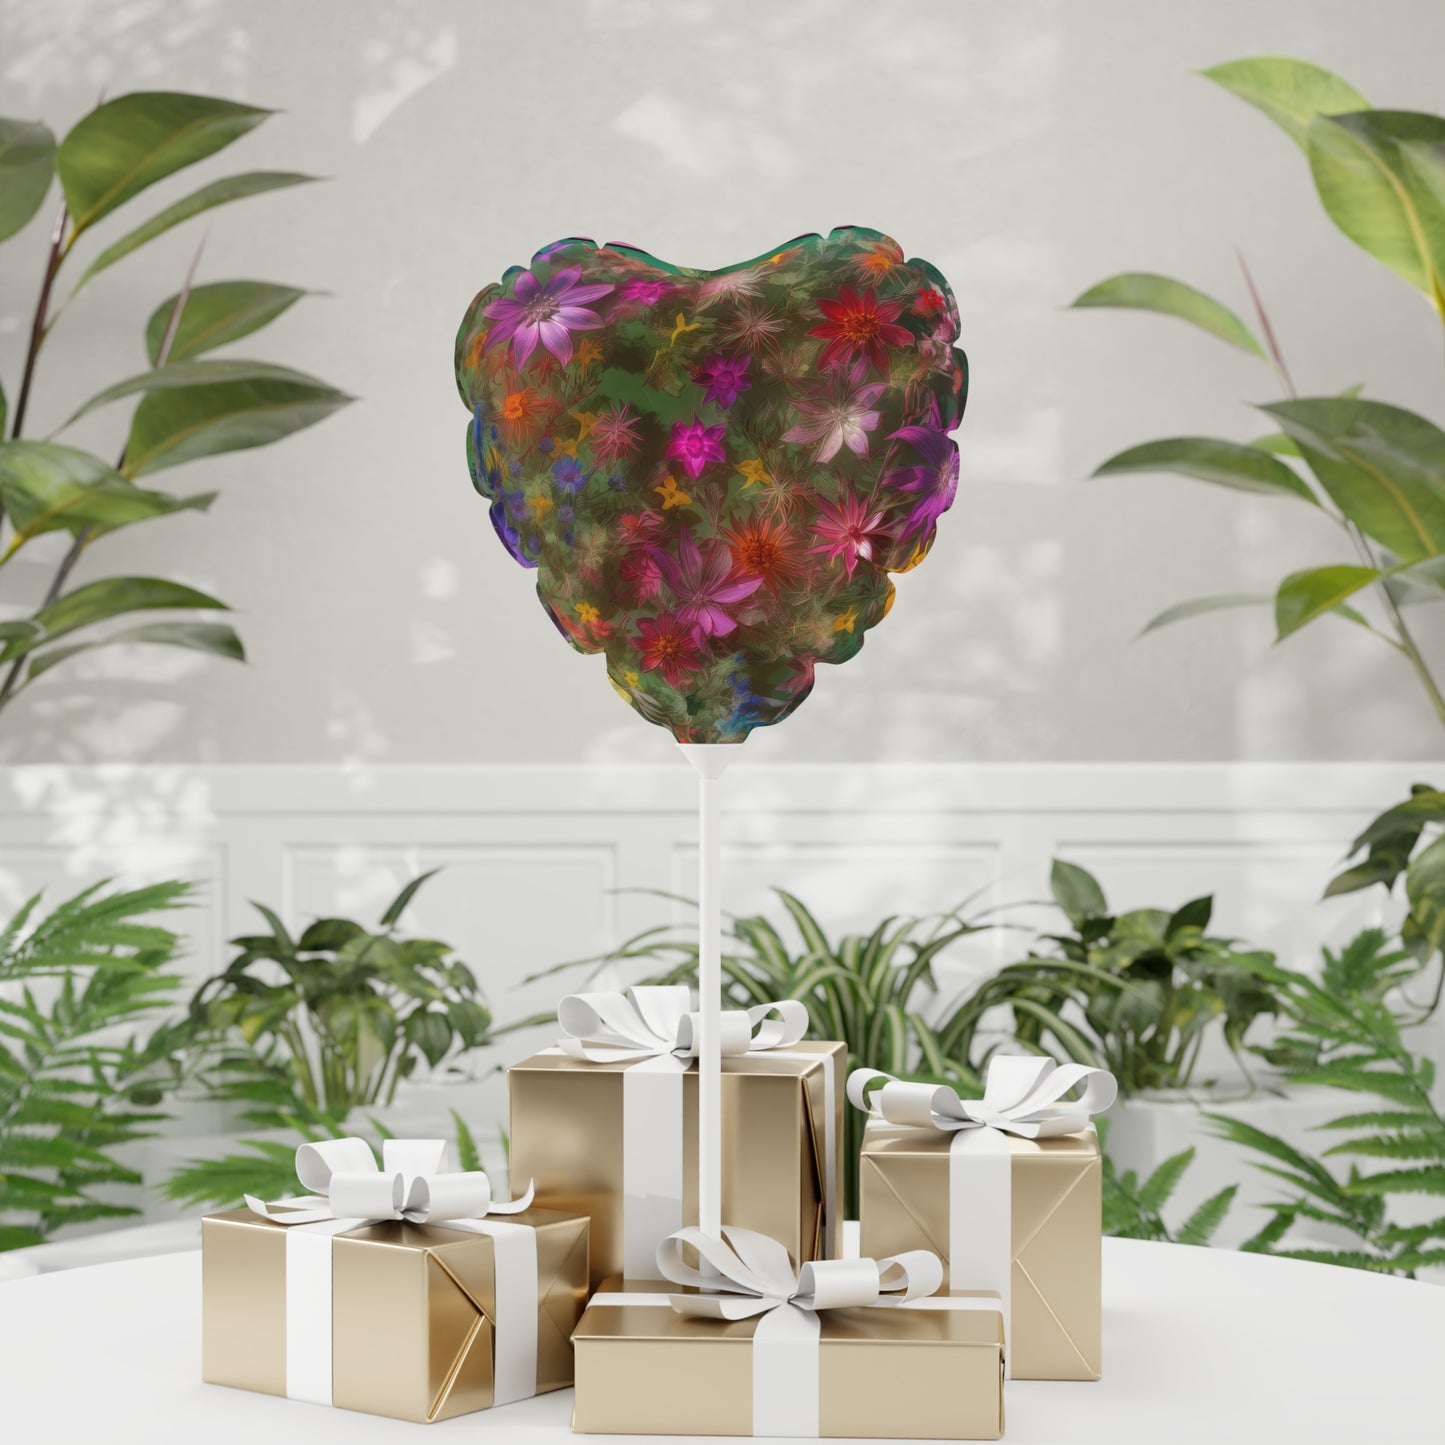 Bold & Beautiful & Metallic Wildflowers, Gorgeous floral Design, Style 3 Balloon (Round and Heart-shaped), 11"